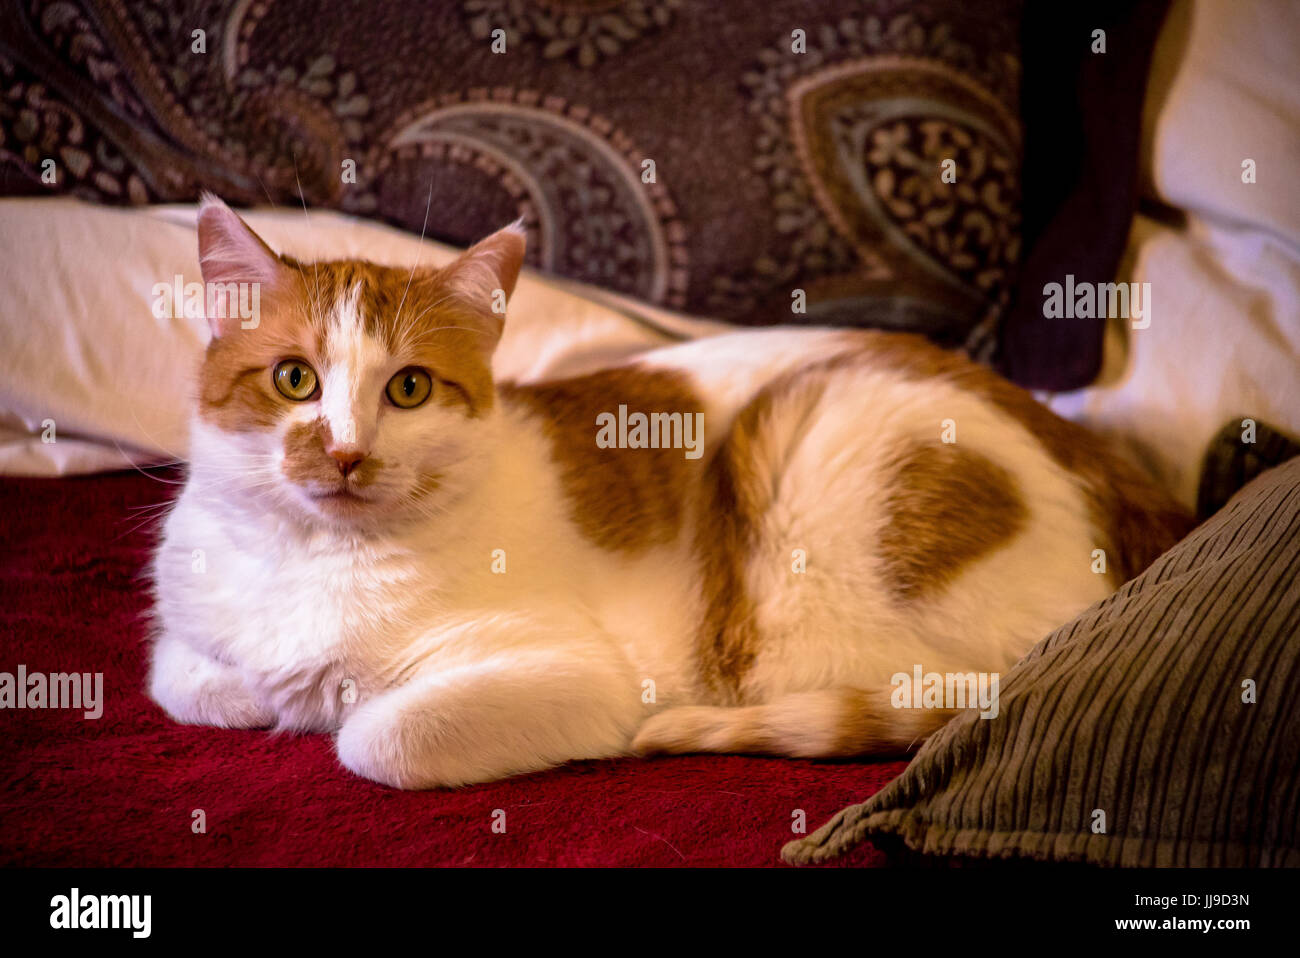 Beautiful orange and white cat relaxing in bed. Stock Photo